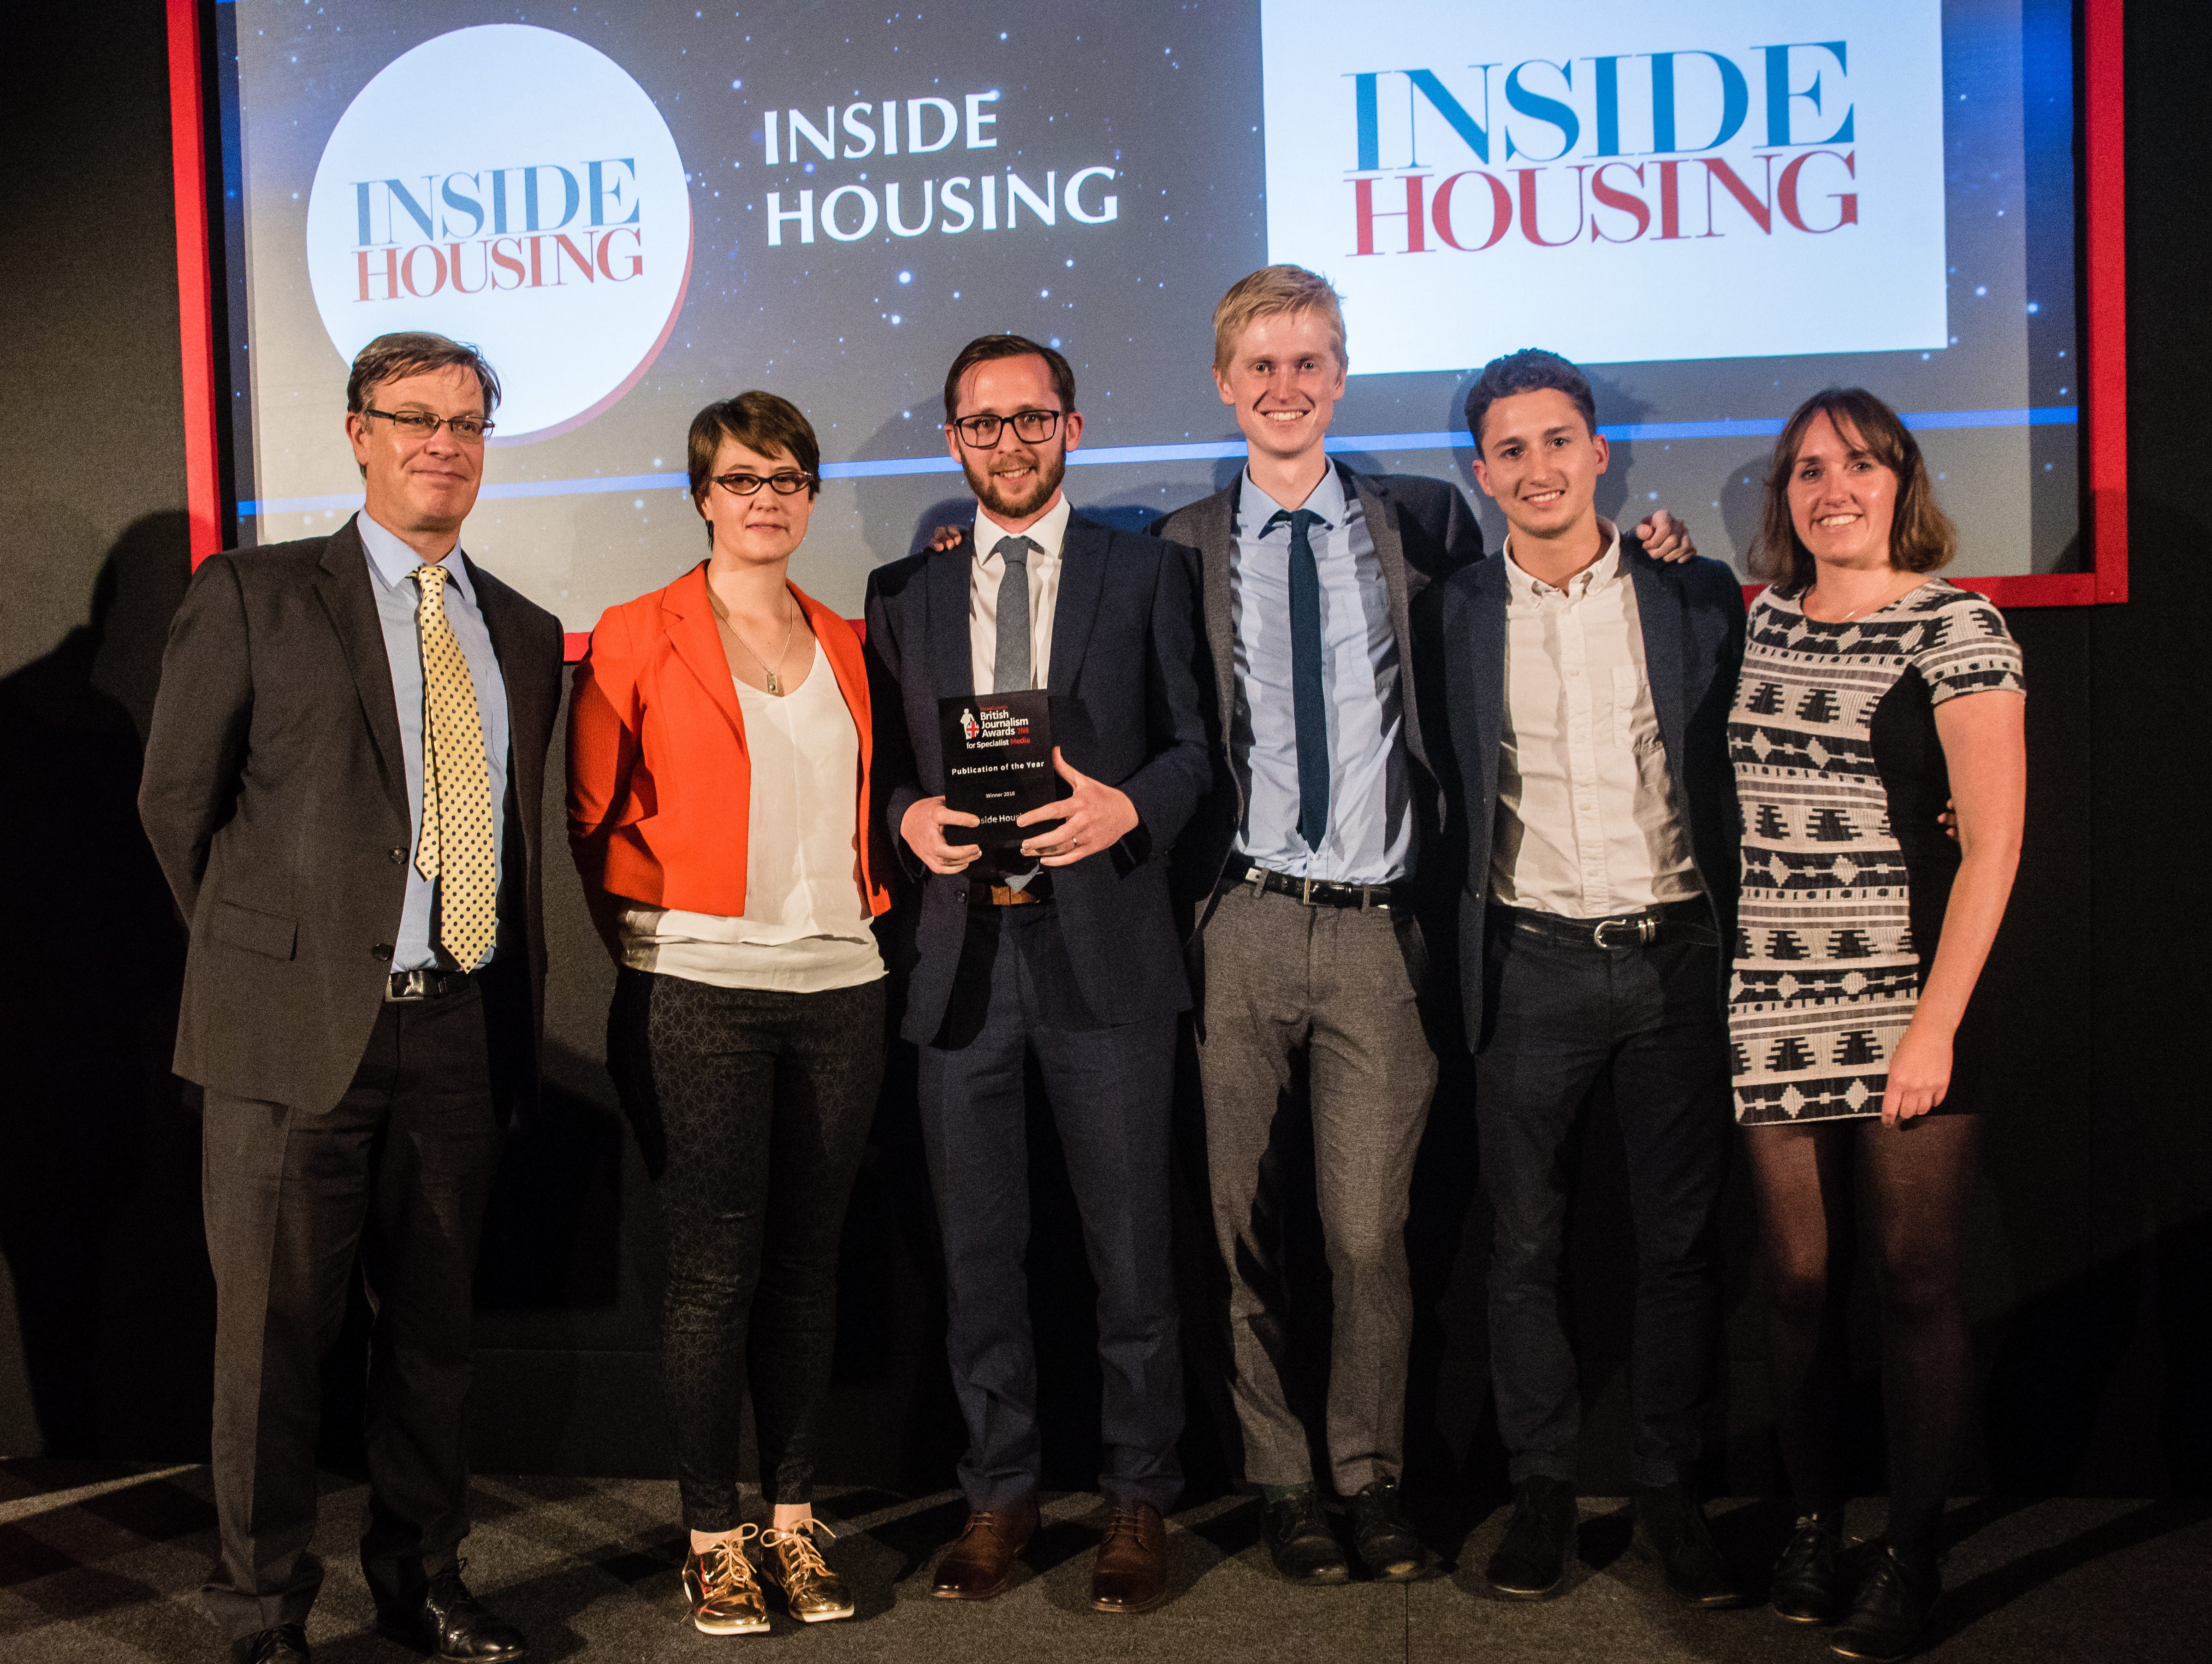 British Journalism Awards for Specialist Media 2018: Inside Housing named publication of the year + full list of winners